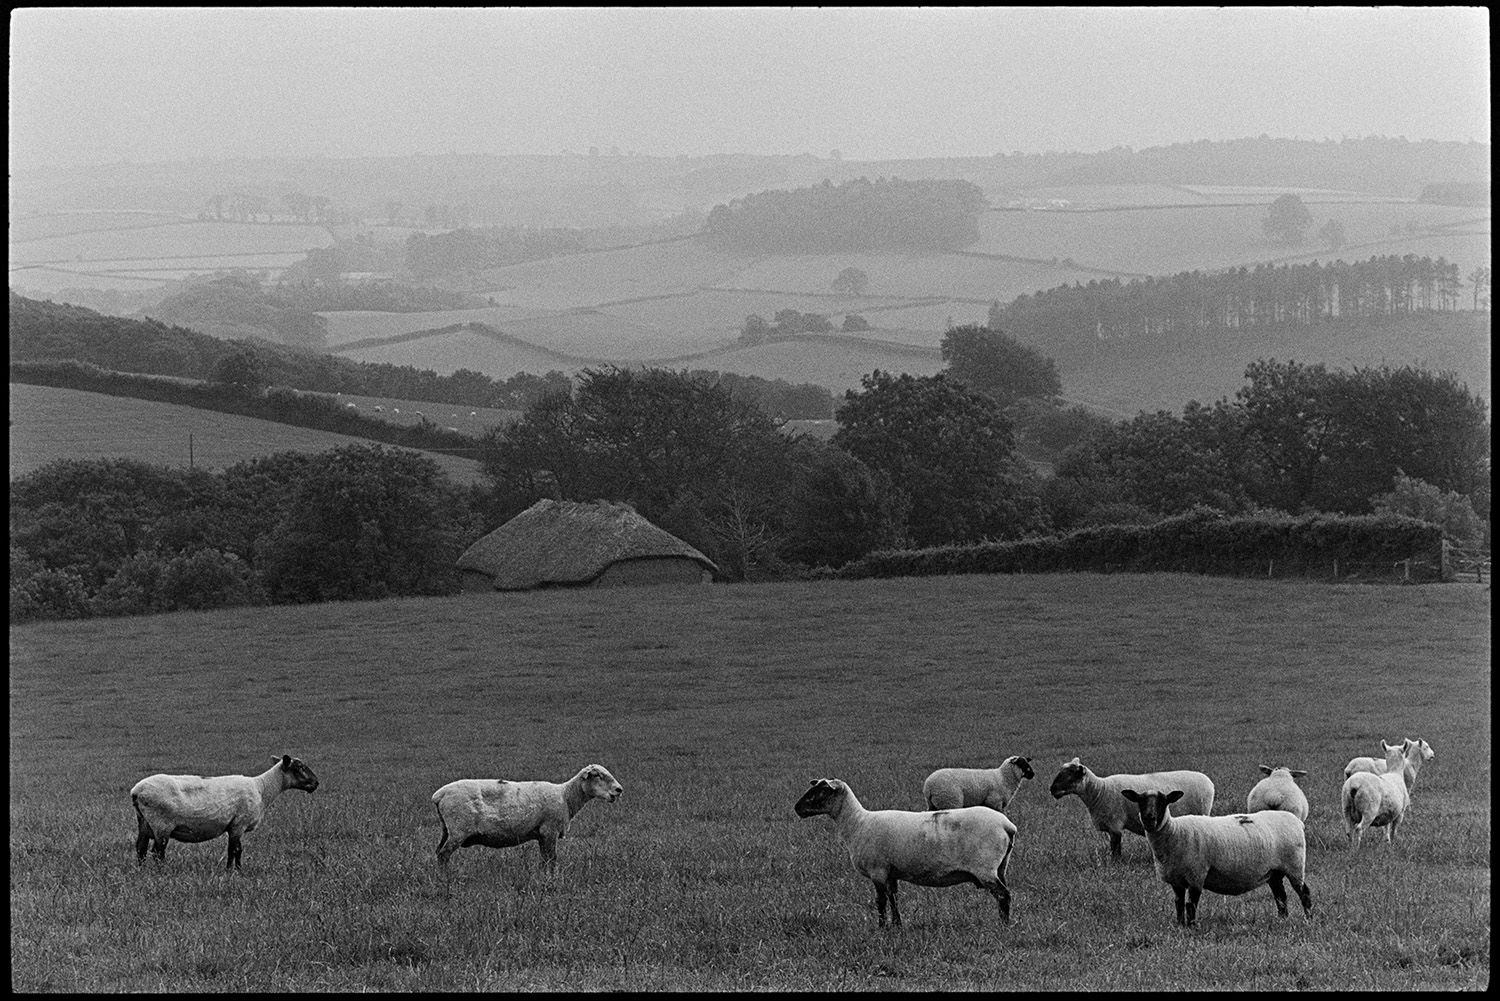 Sheep in field, thatched barn in background (now gone). 
[Sheep grazing in a field near Beaford Wood. A thatched barn can be seen in the background. It was later demolished. A misty landscape of fields, trees and hedges can be seen in the distance.]